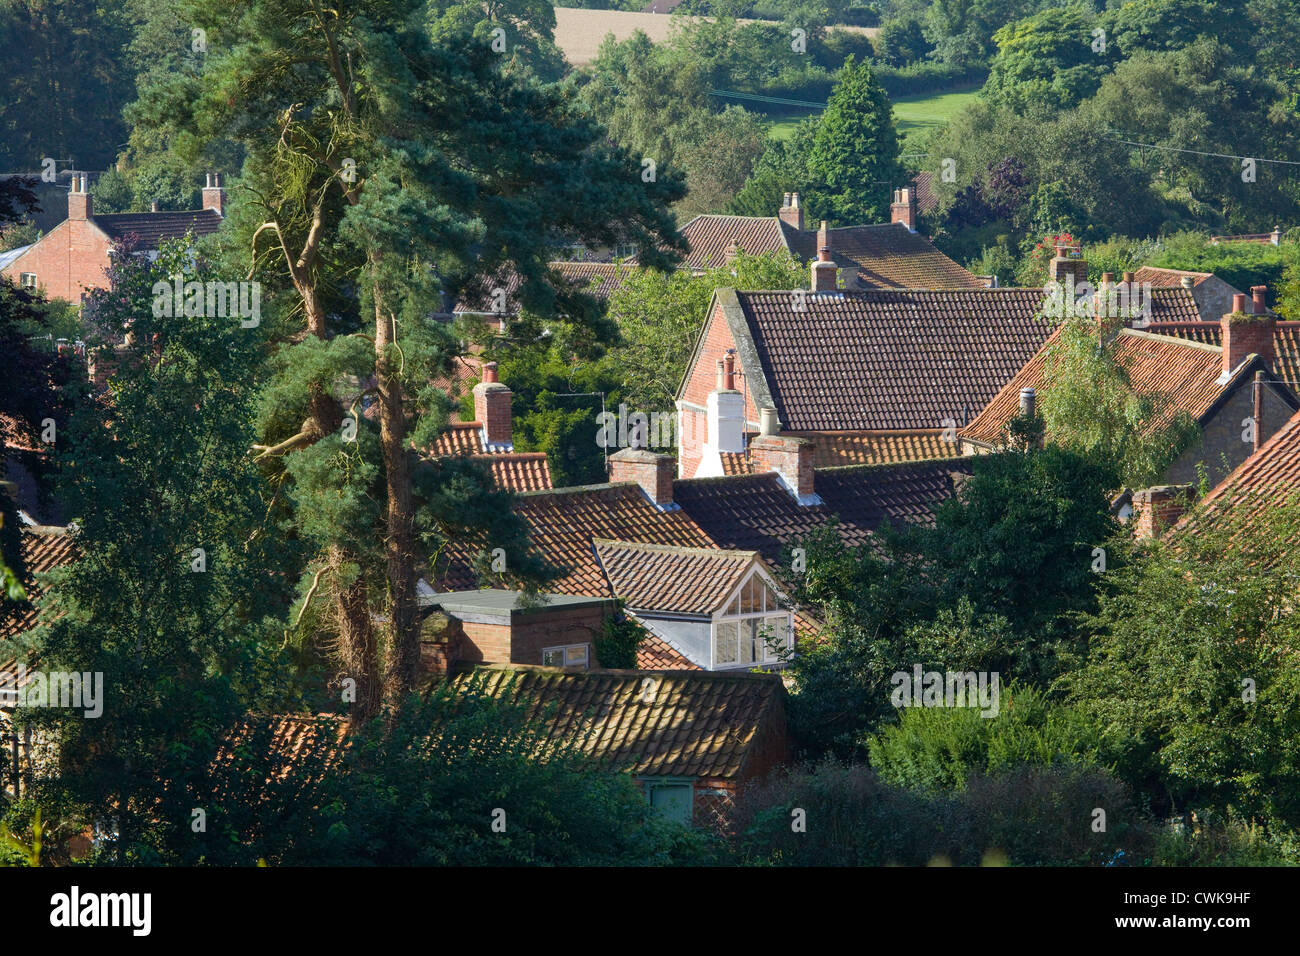 Tealby village in the Lincolnshire Wolds Area of Outstanding Natural Beauty Stock Photo